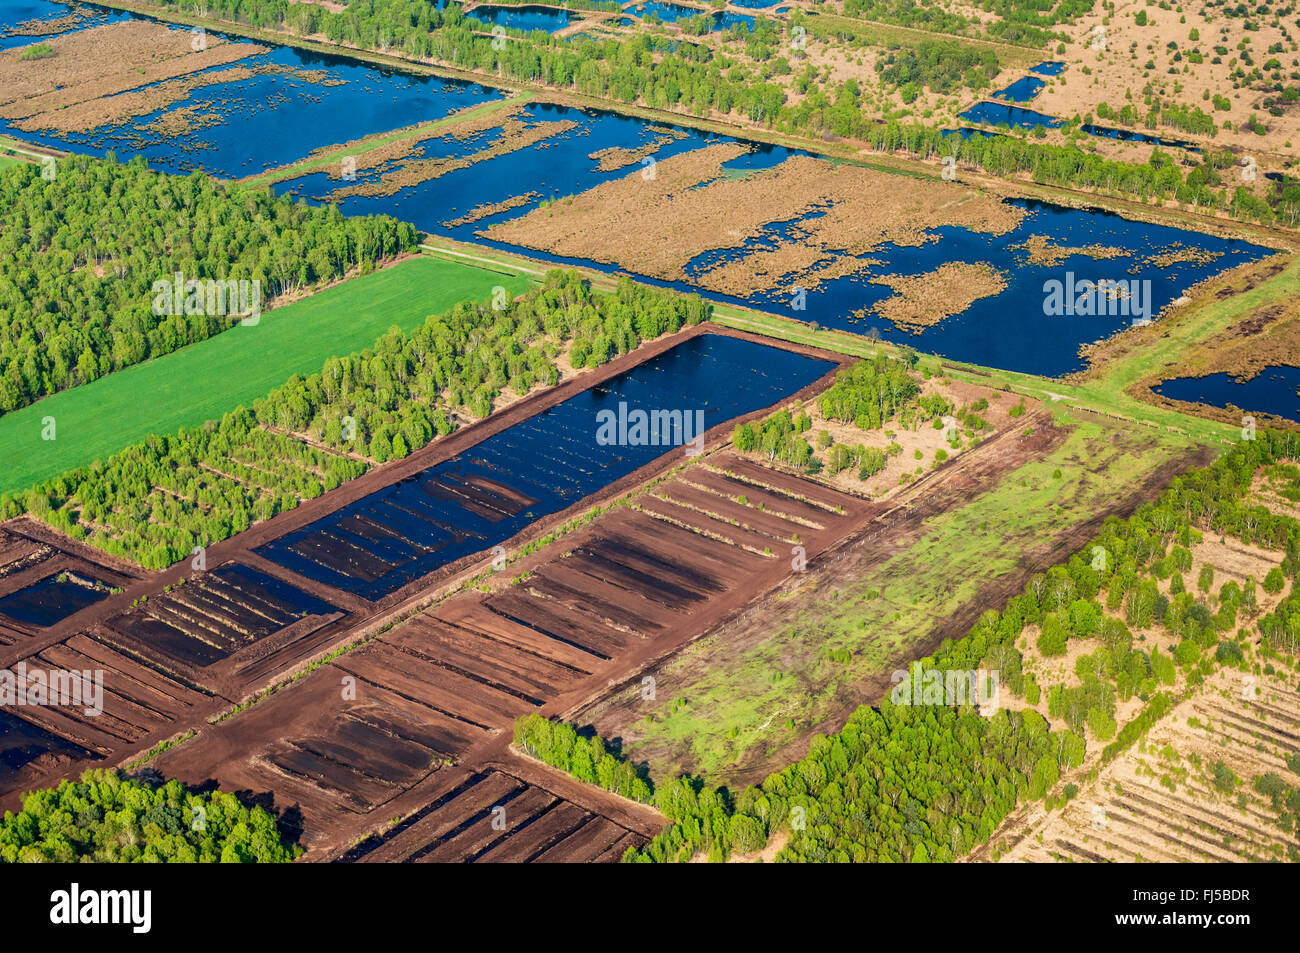 Steinfeld Moor at the county Vechta, aerial view, Germany, Lower Saxony, Oldenburger Muensterland, Steinfeld Stock Photo